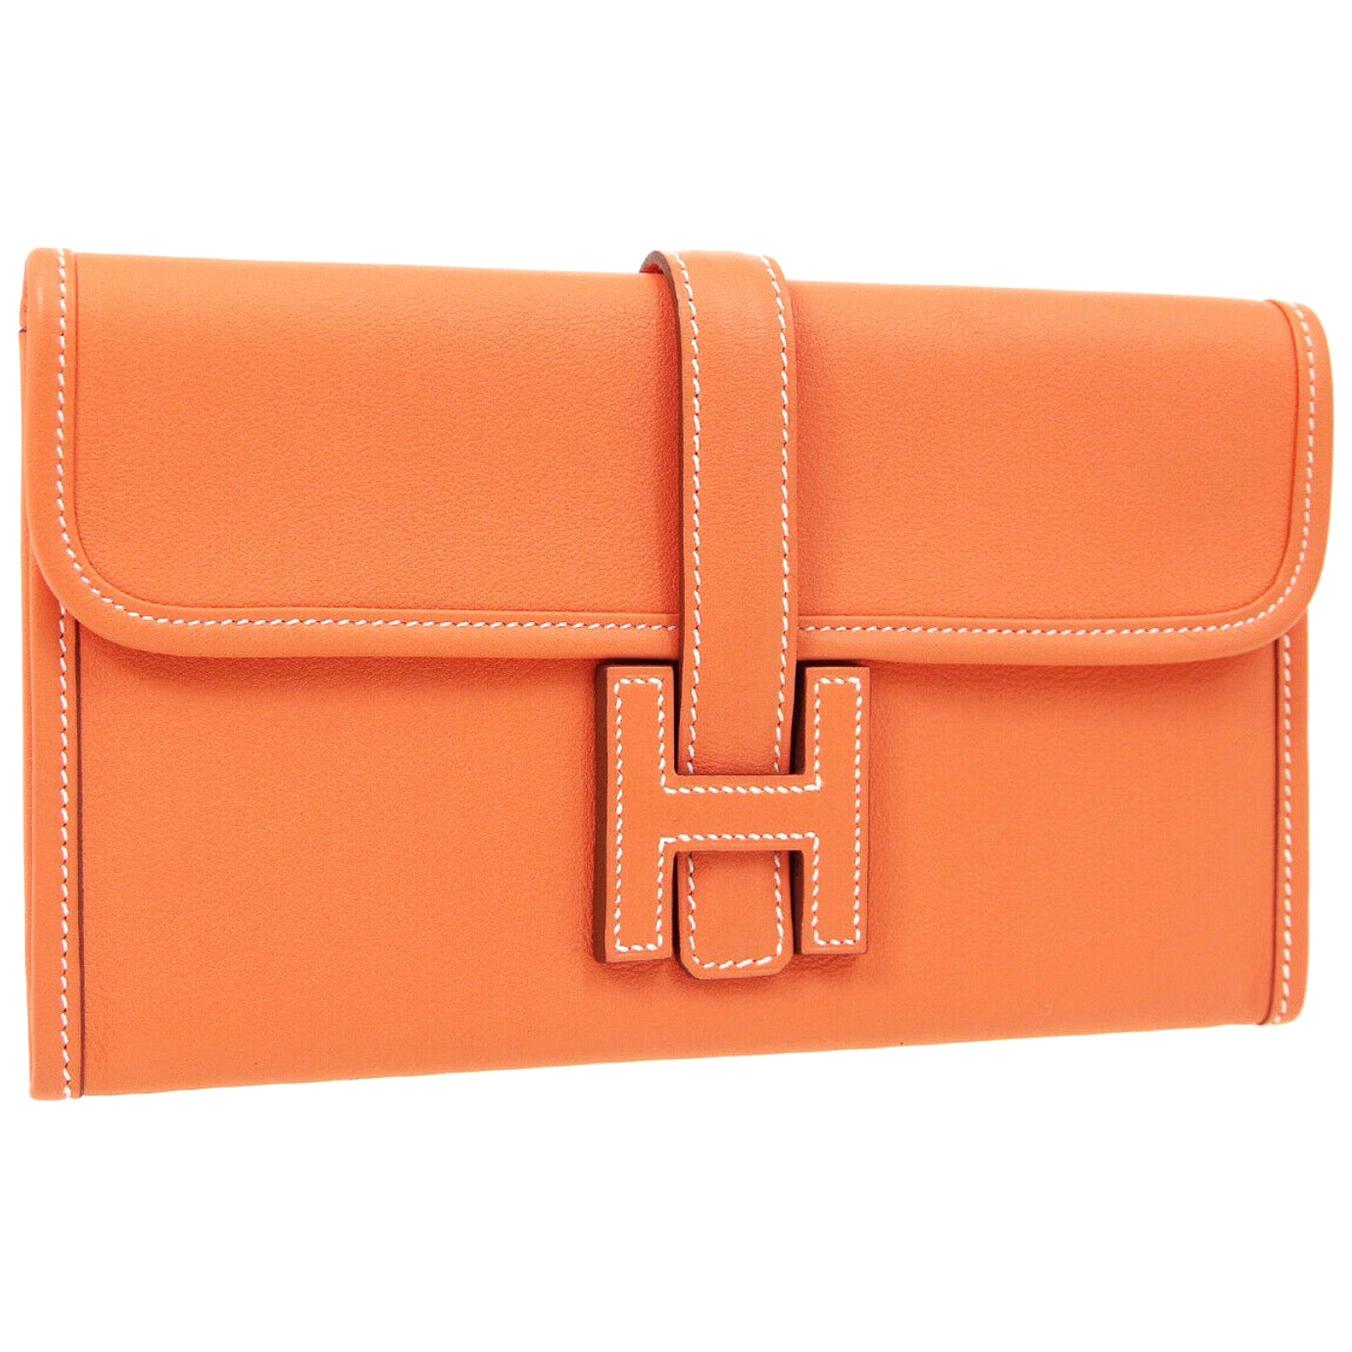 Hermes Orange Leather Small Top Handle Evening 2 in 1 Clutch Wallet Bag